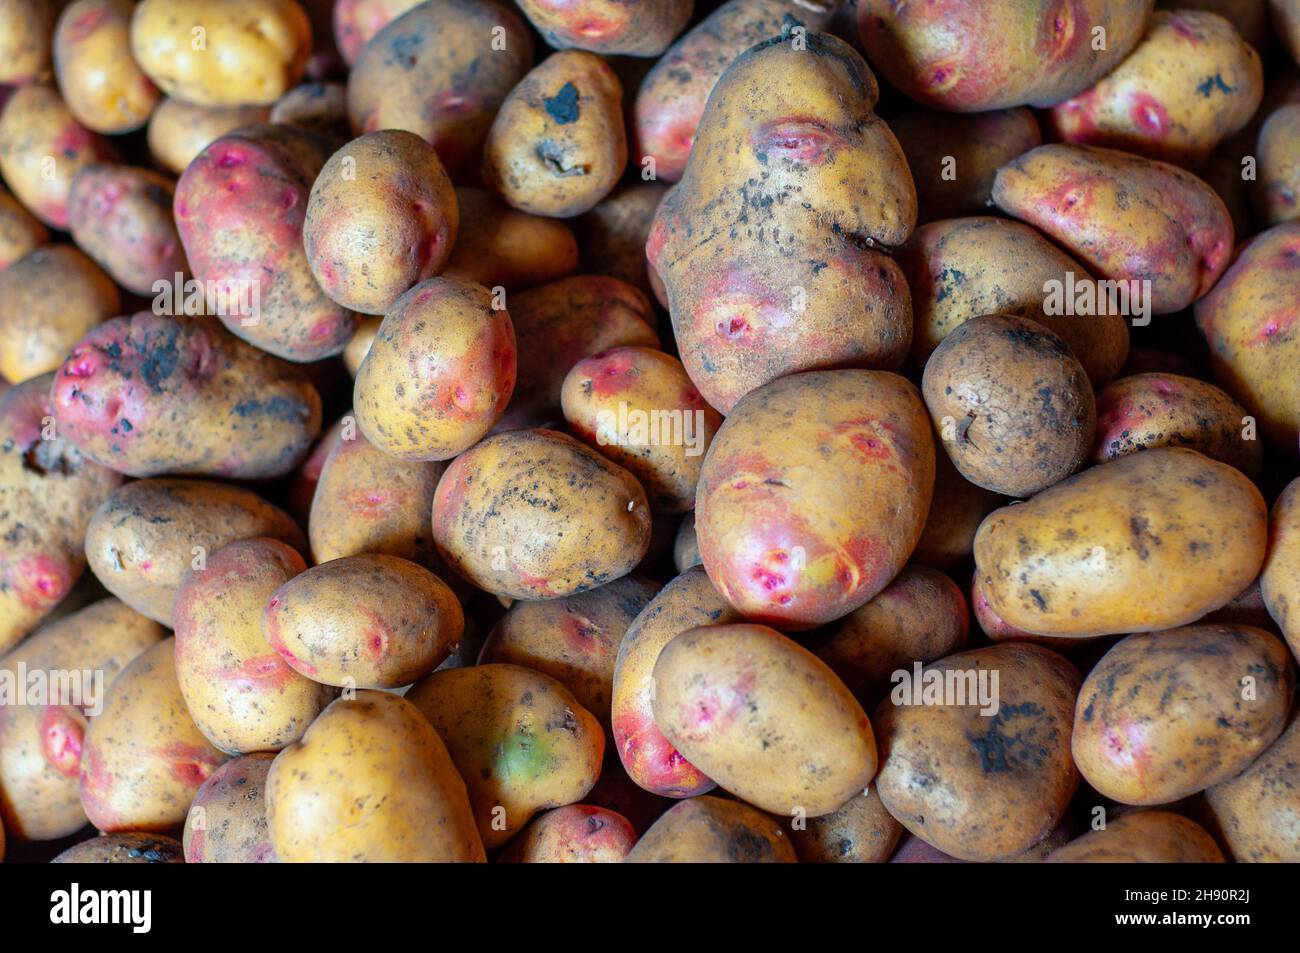 Potato tubers close-up, yellow color with pink eyes. A pile of freshly dug potatoes Stock Photo